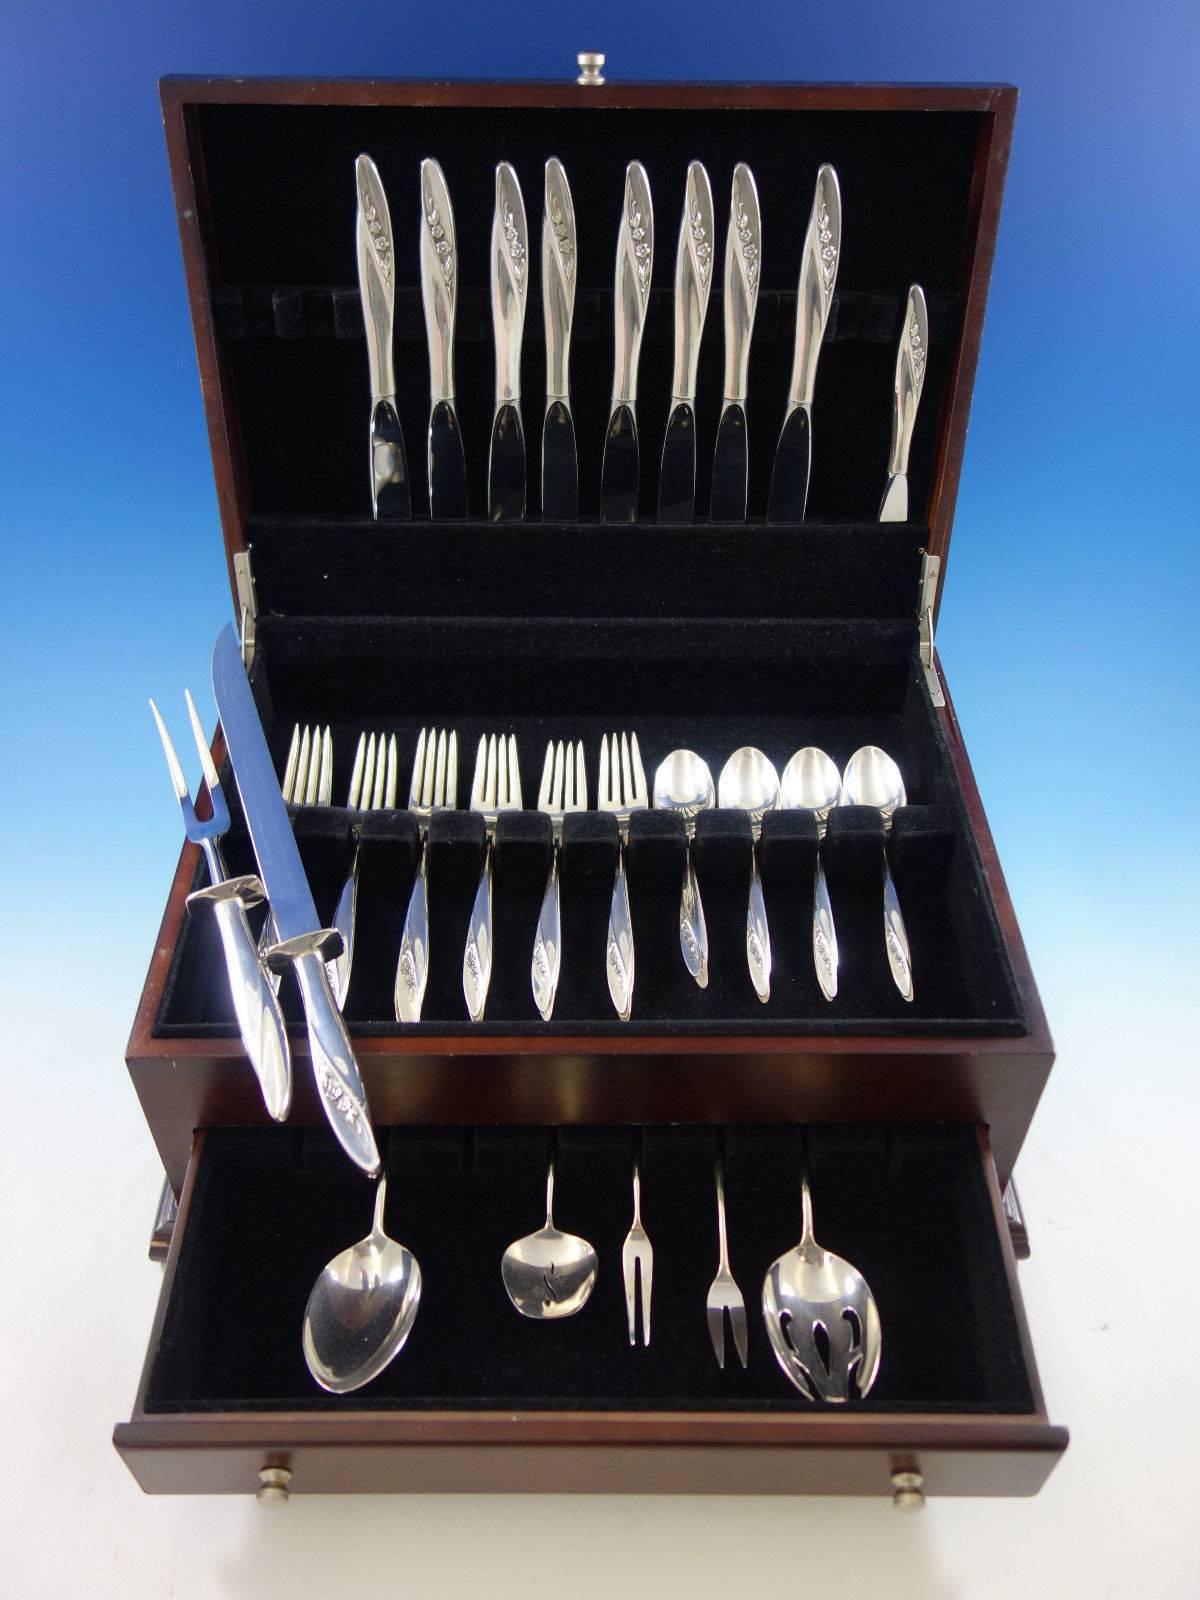 Blithe Spirit by Gorham sterling silver flatware set, 40 pieces. This set includes: 

Eight knives, 9 1/4